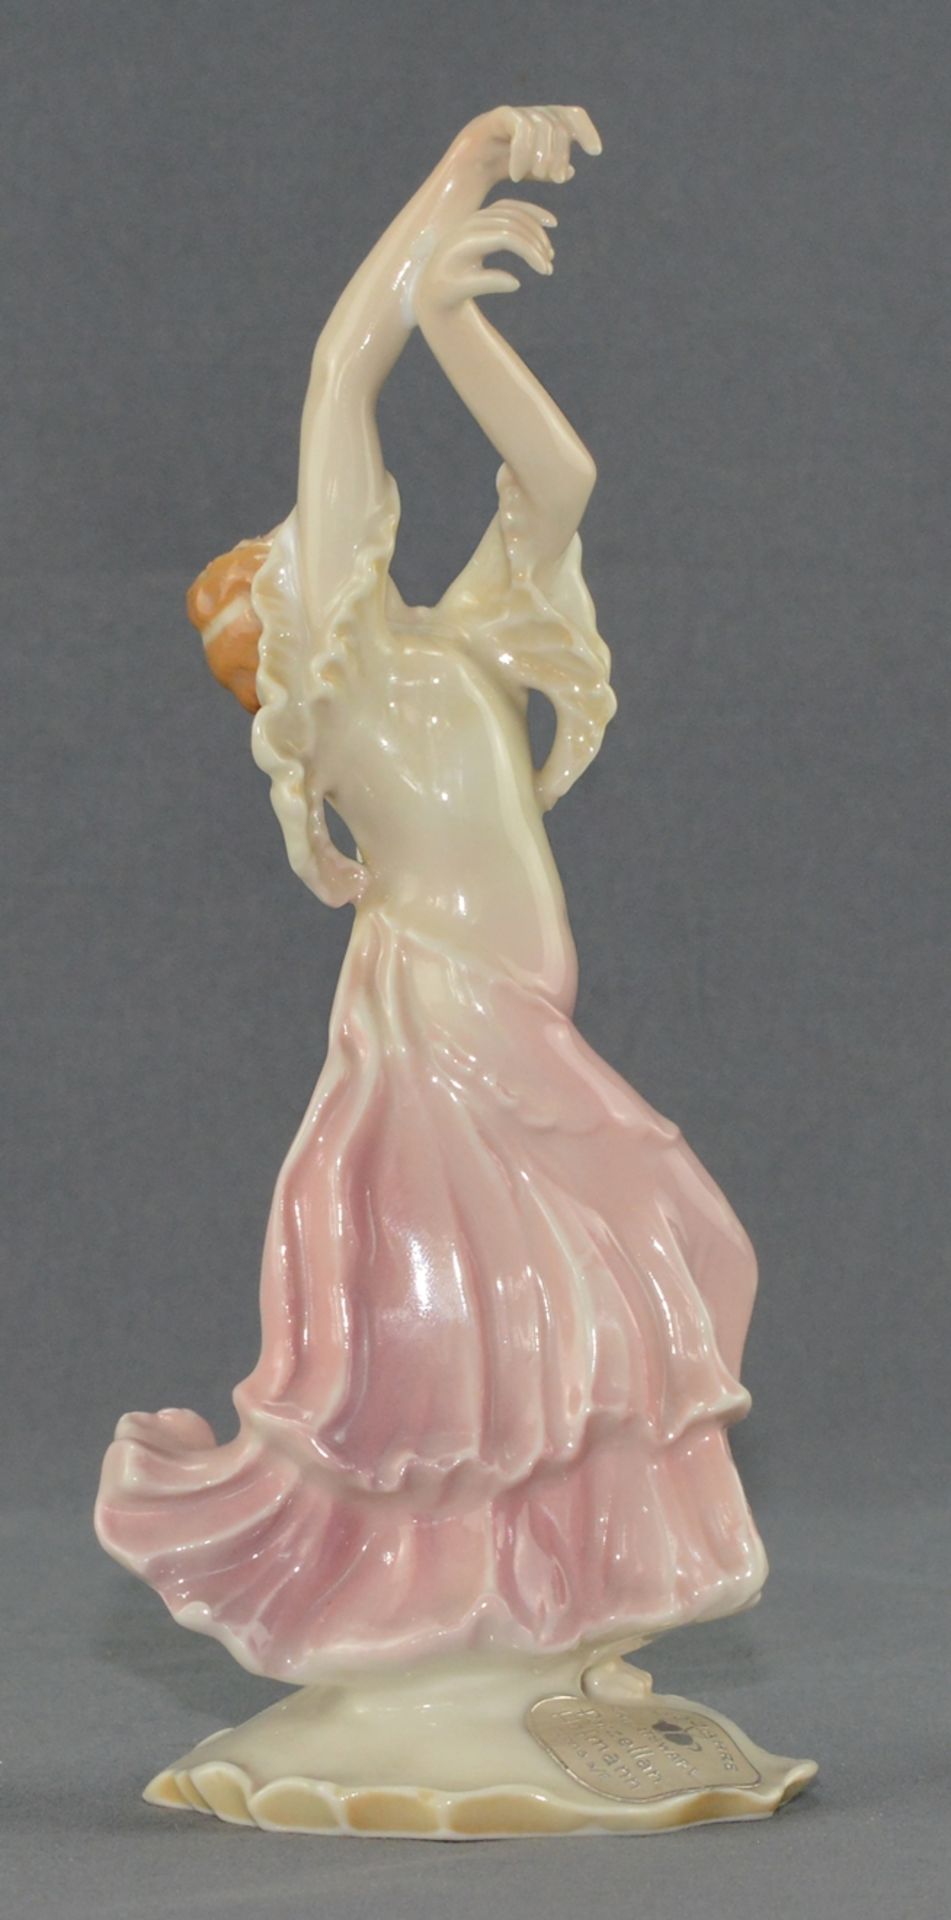 Dancer, in dramatic pose, on curved base, finely polychrome painted, Ens, 20th century, height 21cm - Image 2 of 8